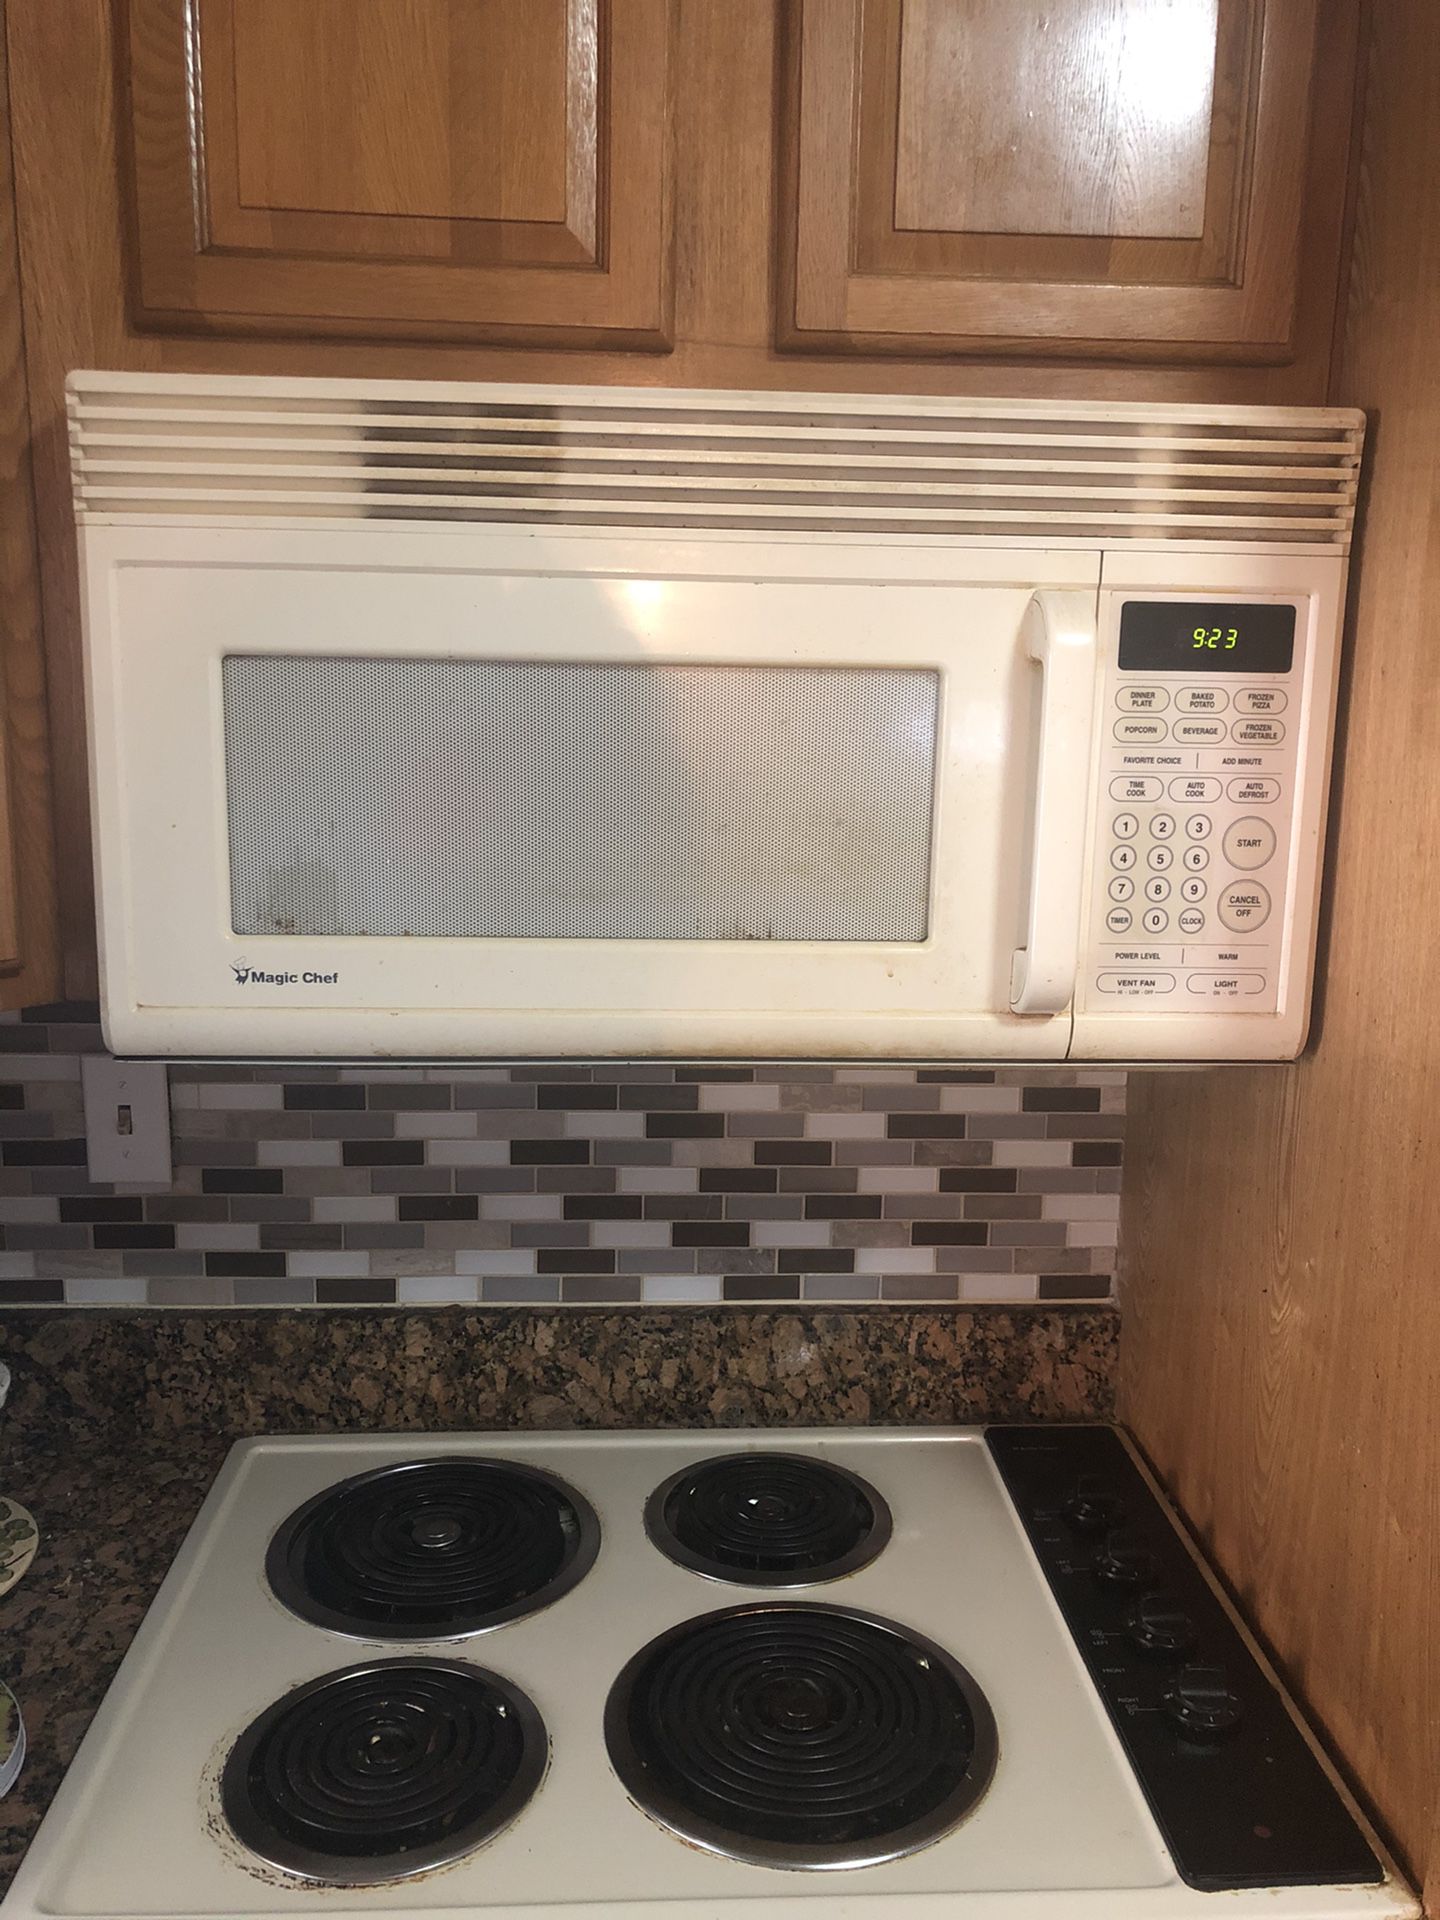 Microwave, stove top, in cabinet oven. All work! Kitchen remodeling and replacing with new appliances